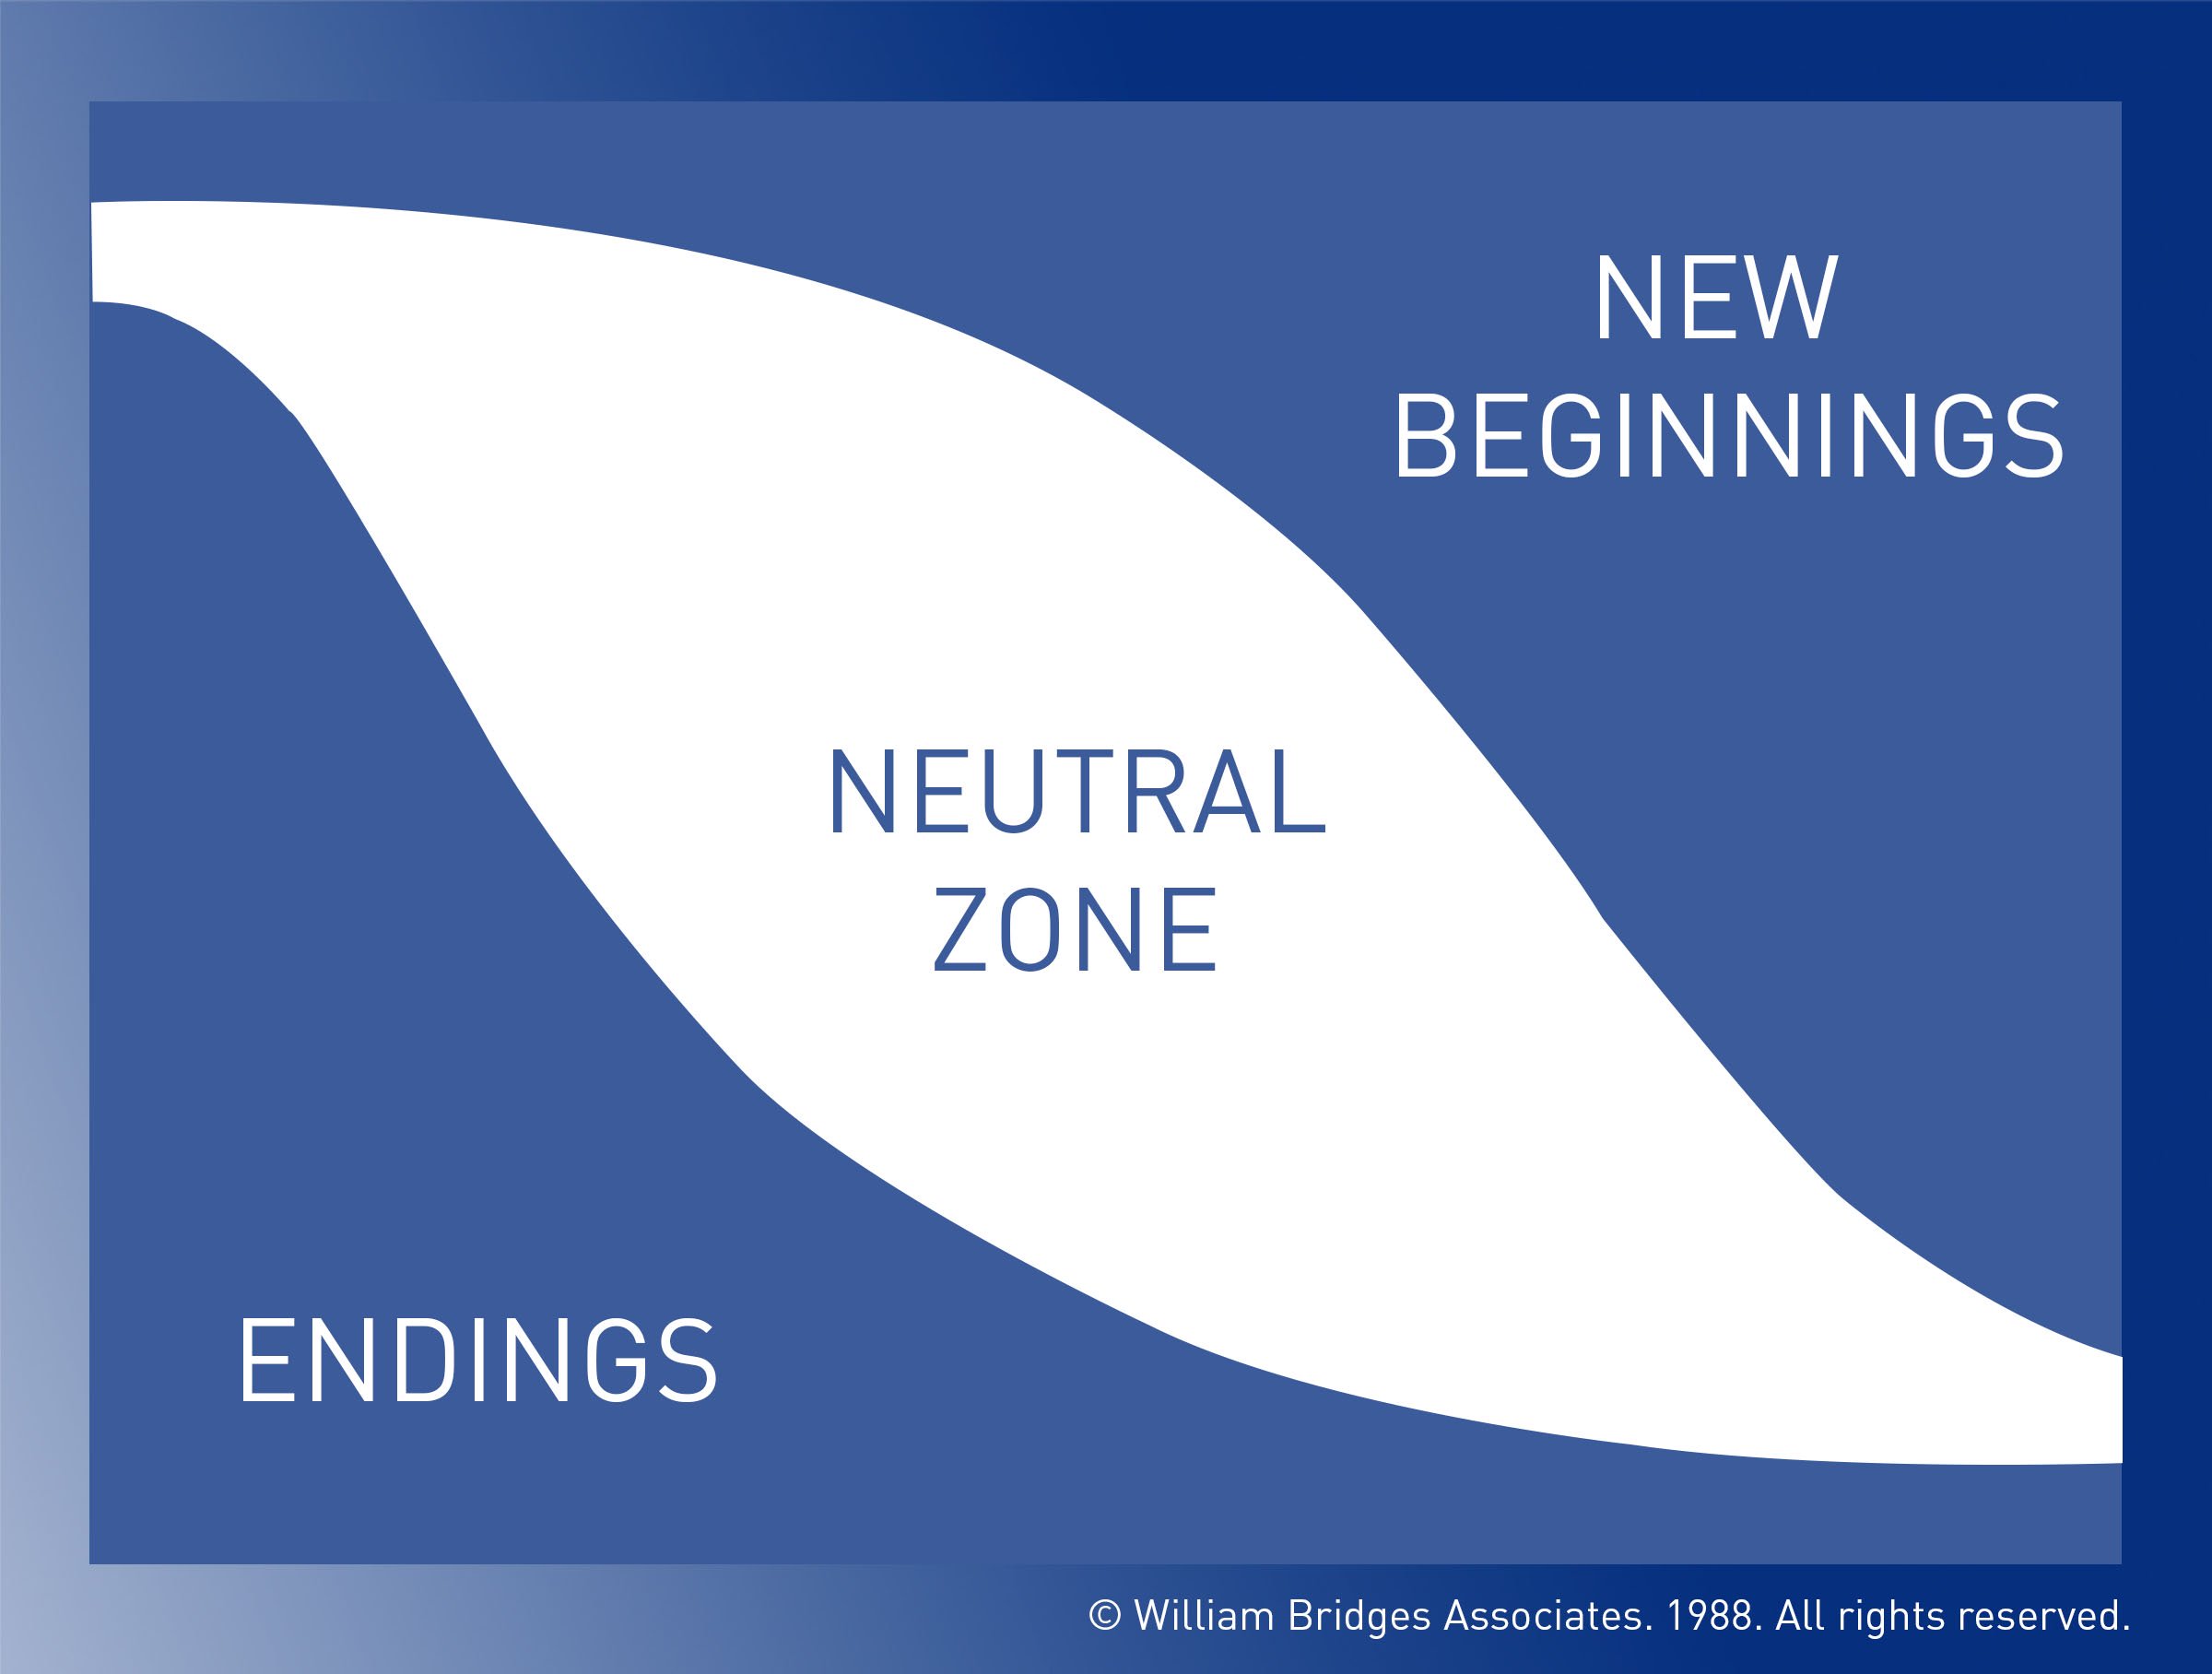 Bridges Transition Model
Change Is External Transition Is Internal. Graphic showing the 3 stages of transition as: Ending, Neutral Zone and New Beginnings.